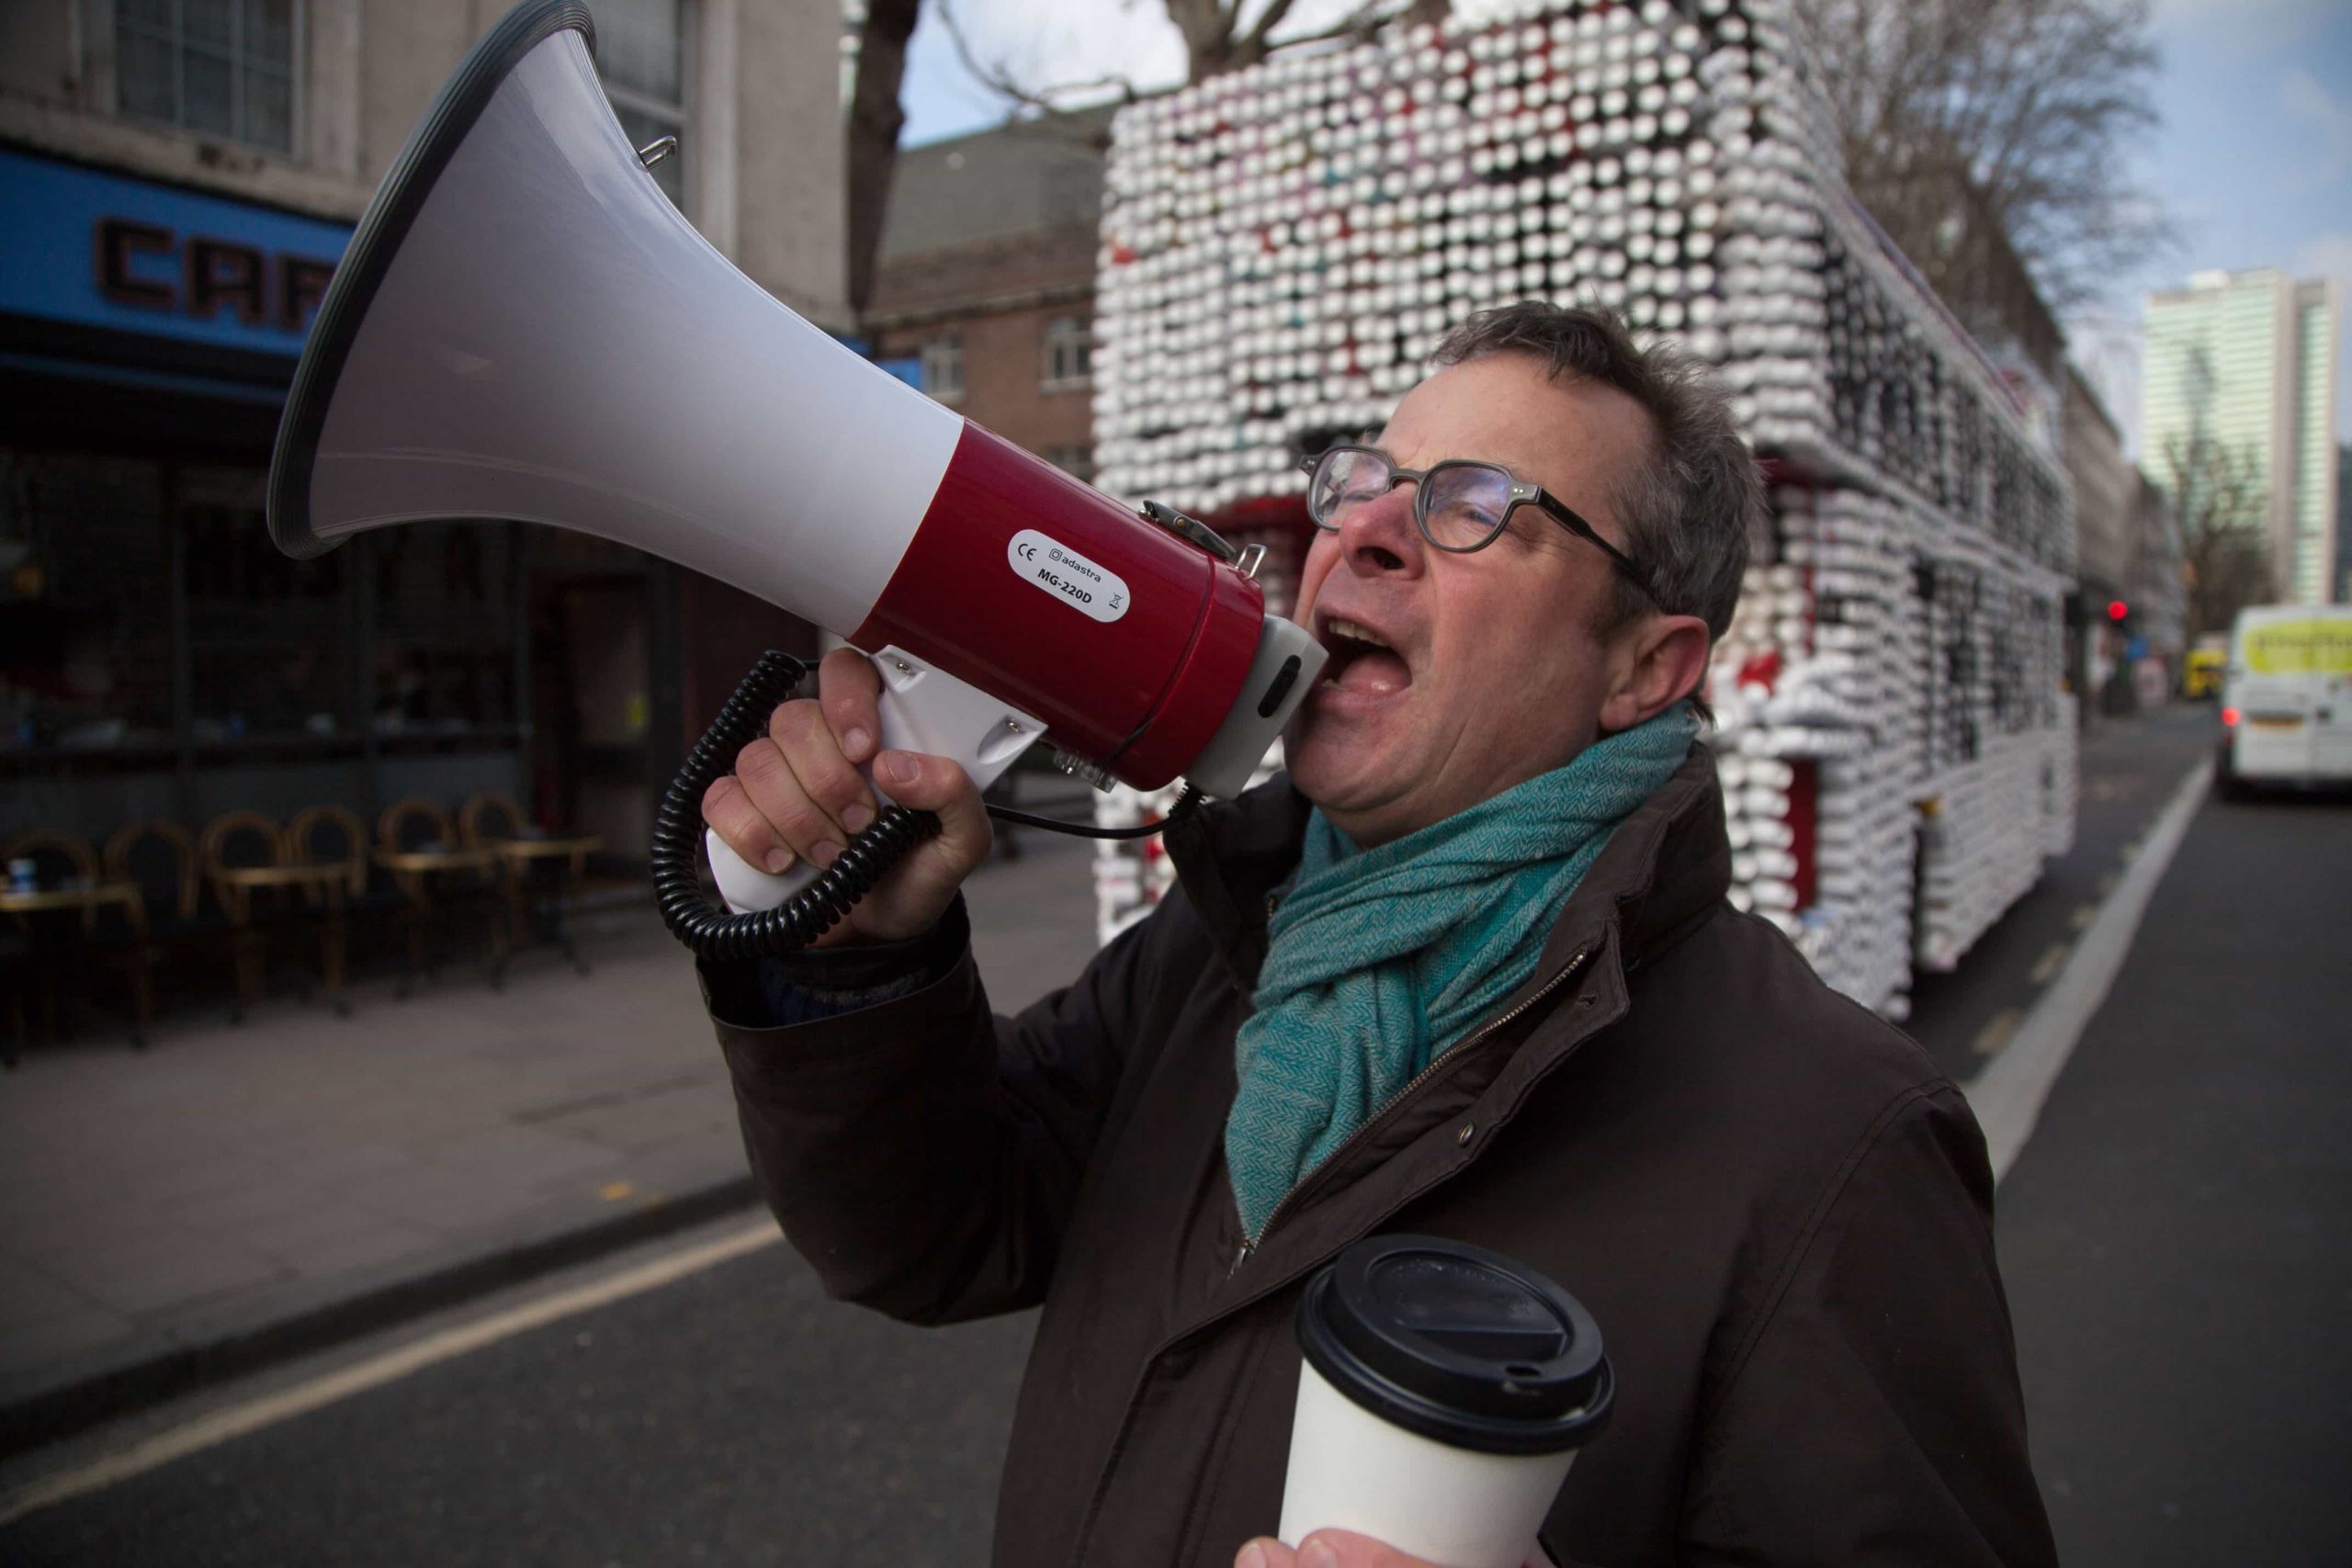 Hugh Fearnley-Whittingstall will confront coffee chain giants on their recycling policies in his 'War on Waste' documentary (C) Keo Films - Photographer: Gus Palmer